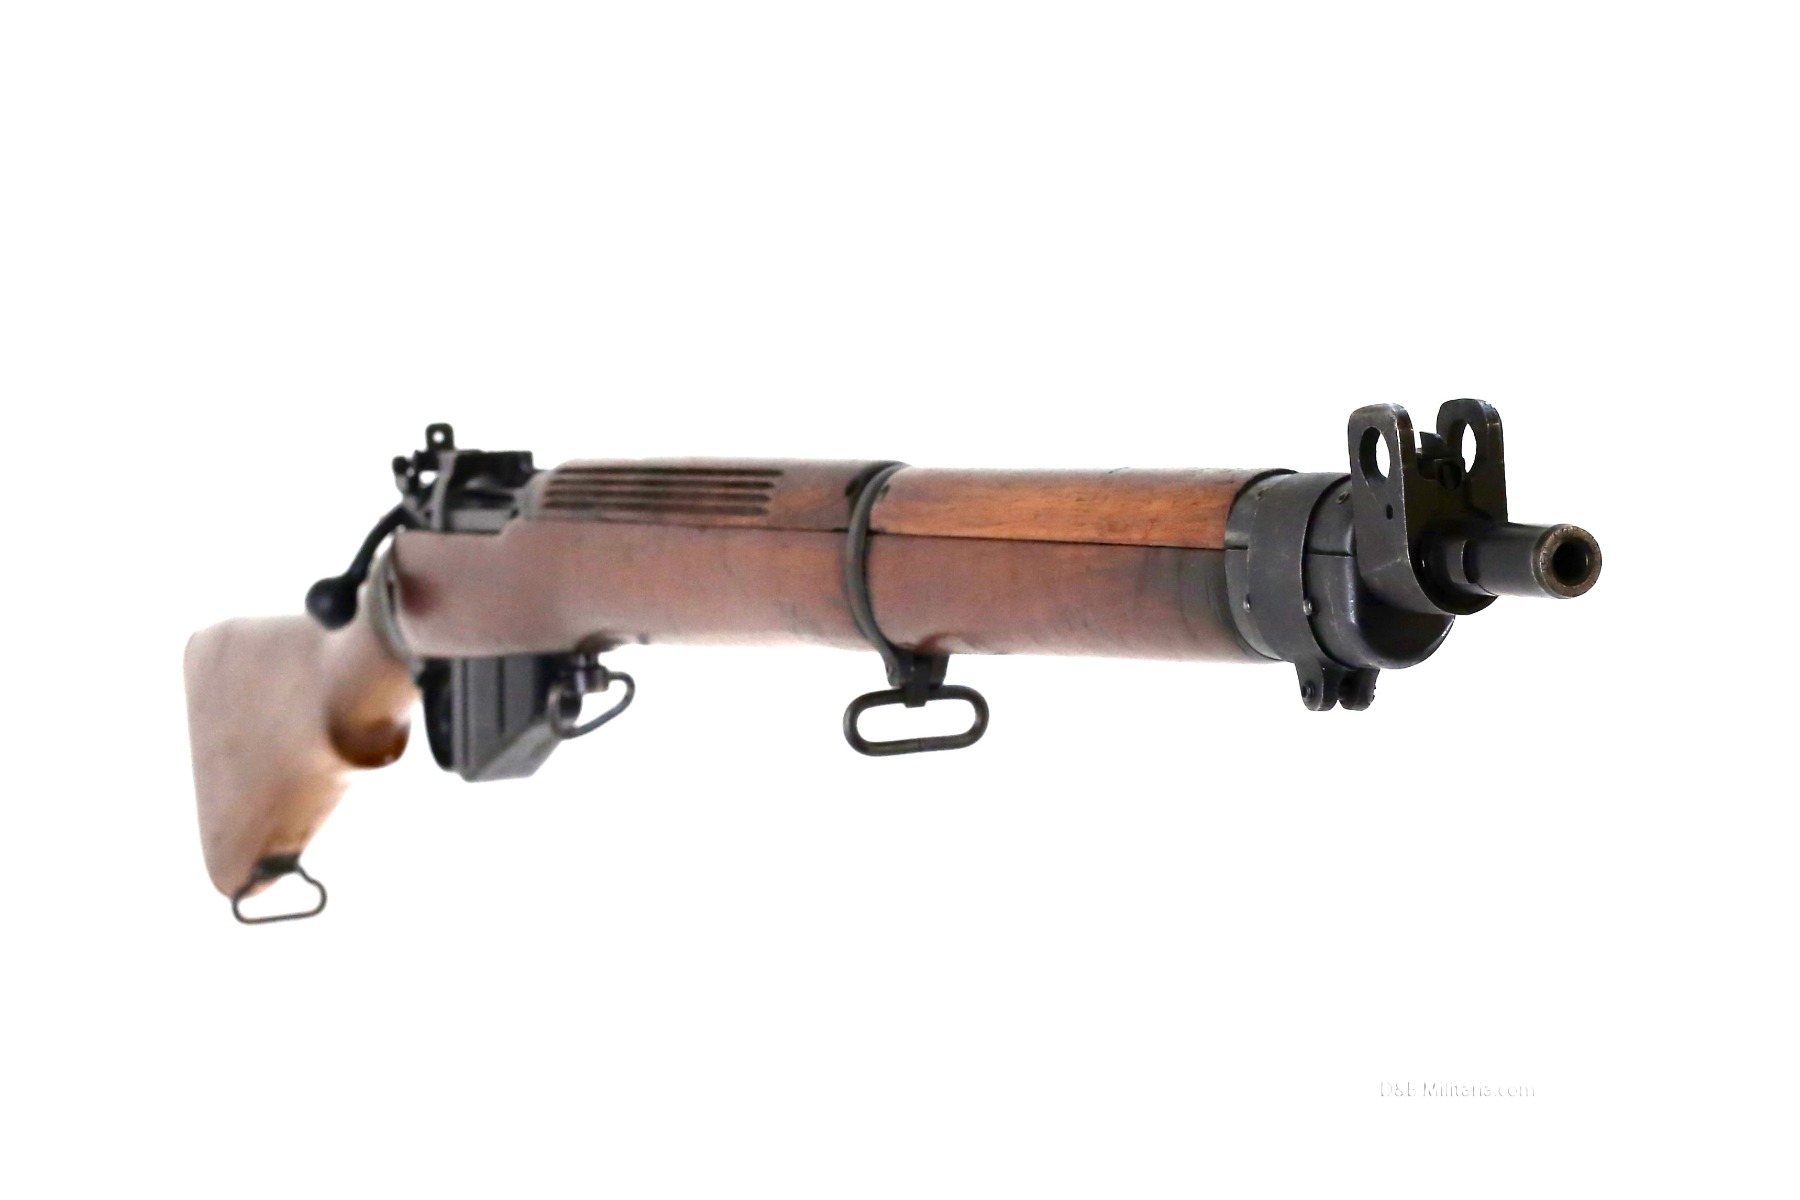 Deactivated Lee-Enfield rifle no4 mk1 British made 1944 dated early spec  SOLD